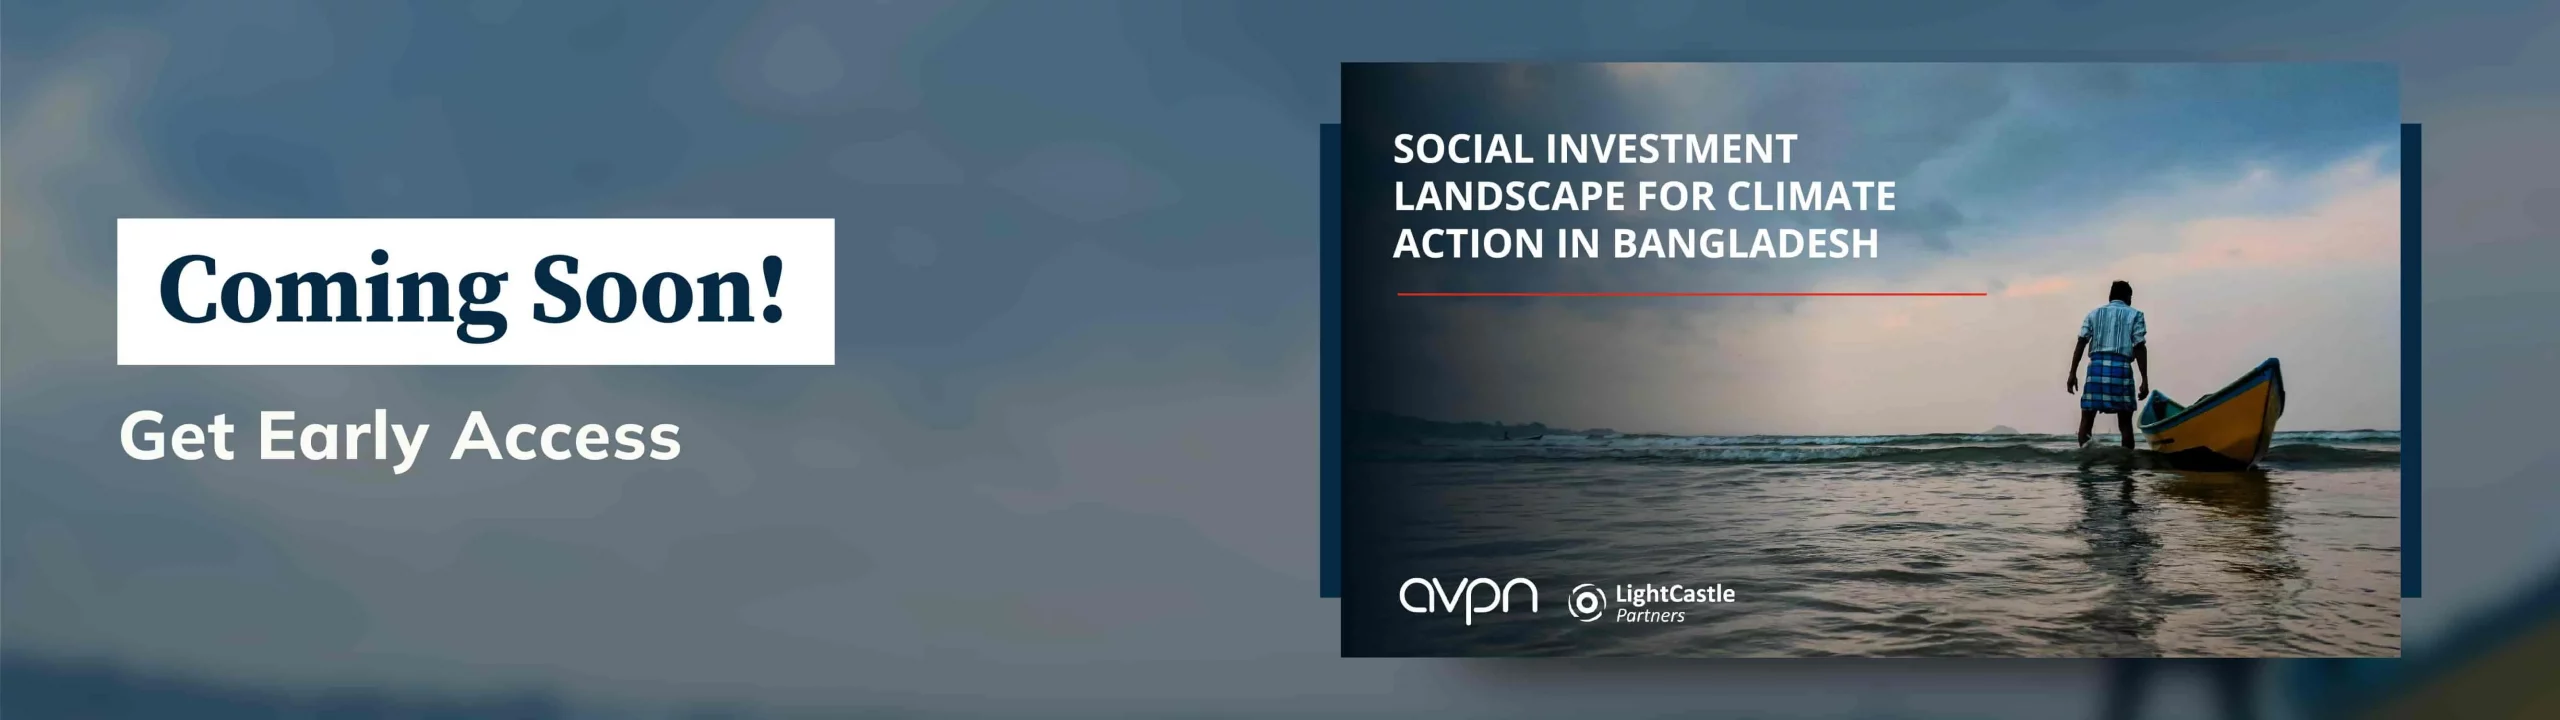 Social investment for climate coming soon